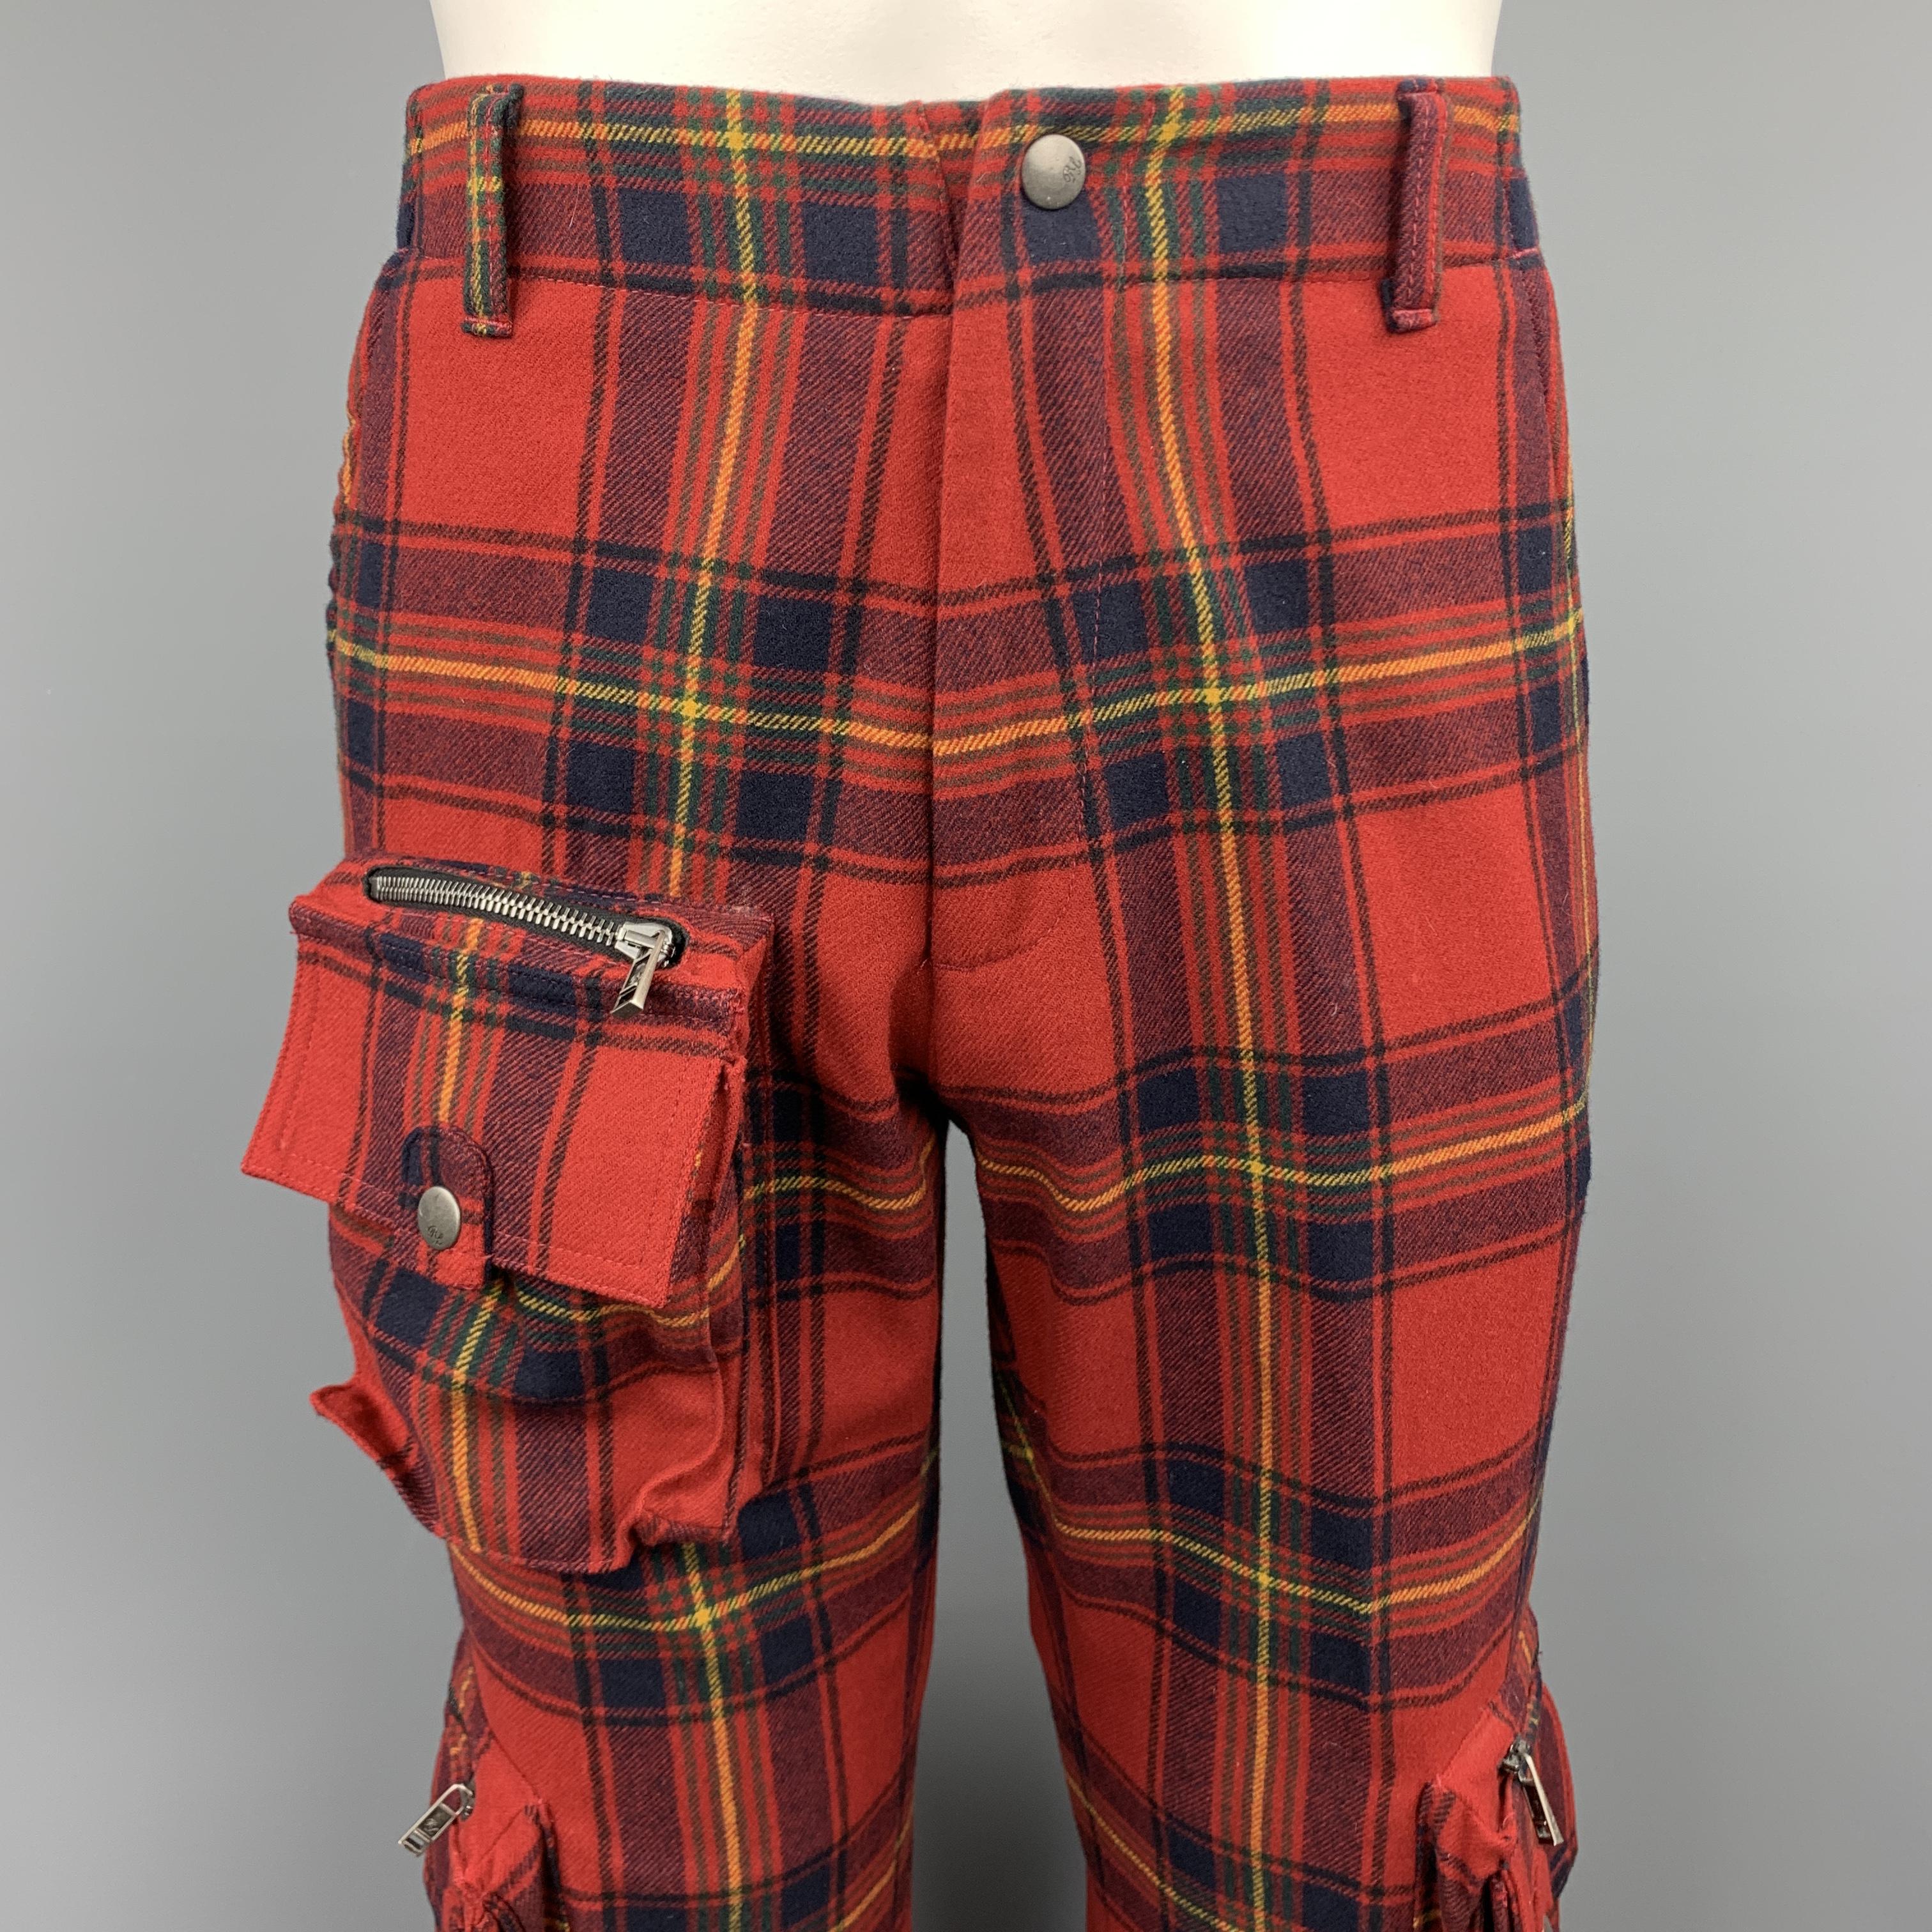 RALPH LAUREN PURPLE LABEL pants come in red plaid wool with patch flap cargo pockets throughout. Made in Italy.

Excellent Pre-Owned Condition.
Marked: 30

Measurements:

Waist: 33 in.
Rise: 11.5 in.
Inseam: 31 in.